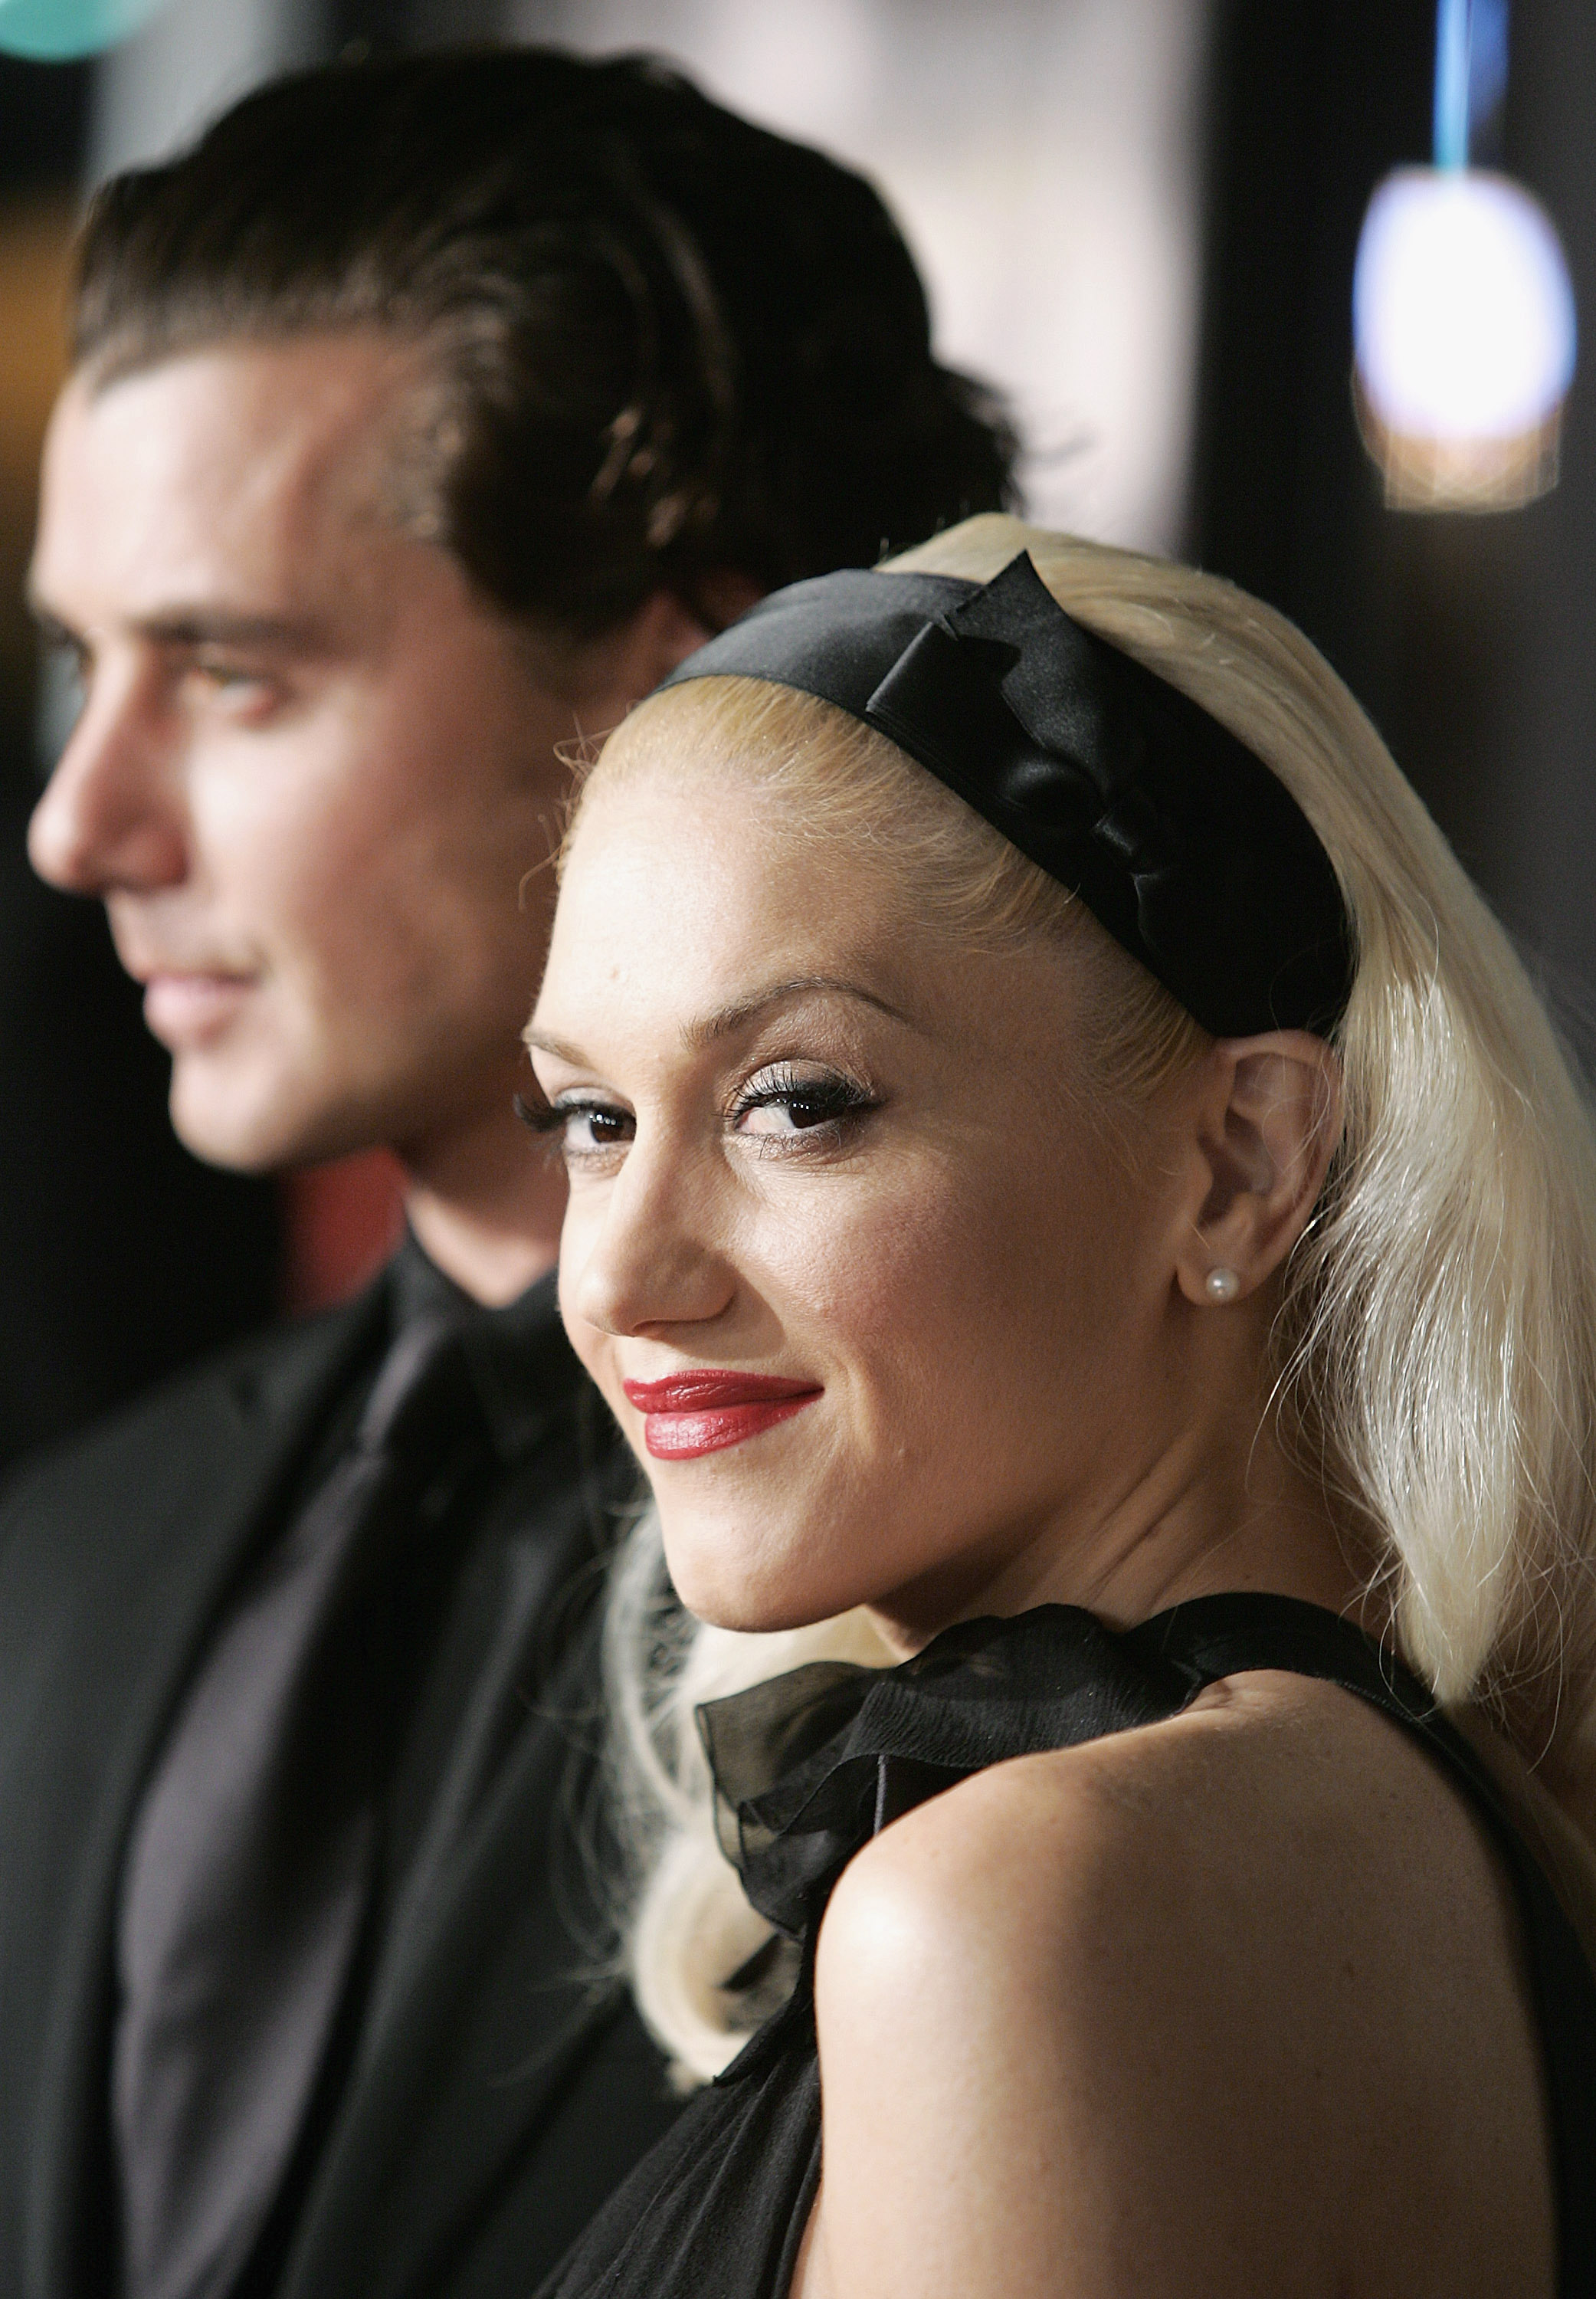 Gavin Rossdale and Gwen Stefani, 2005 | Source: Getty Images